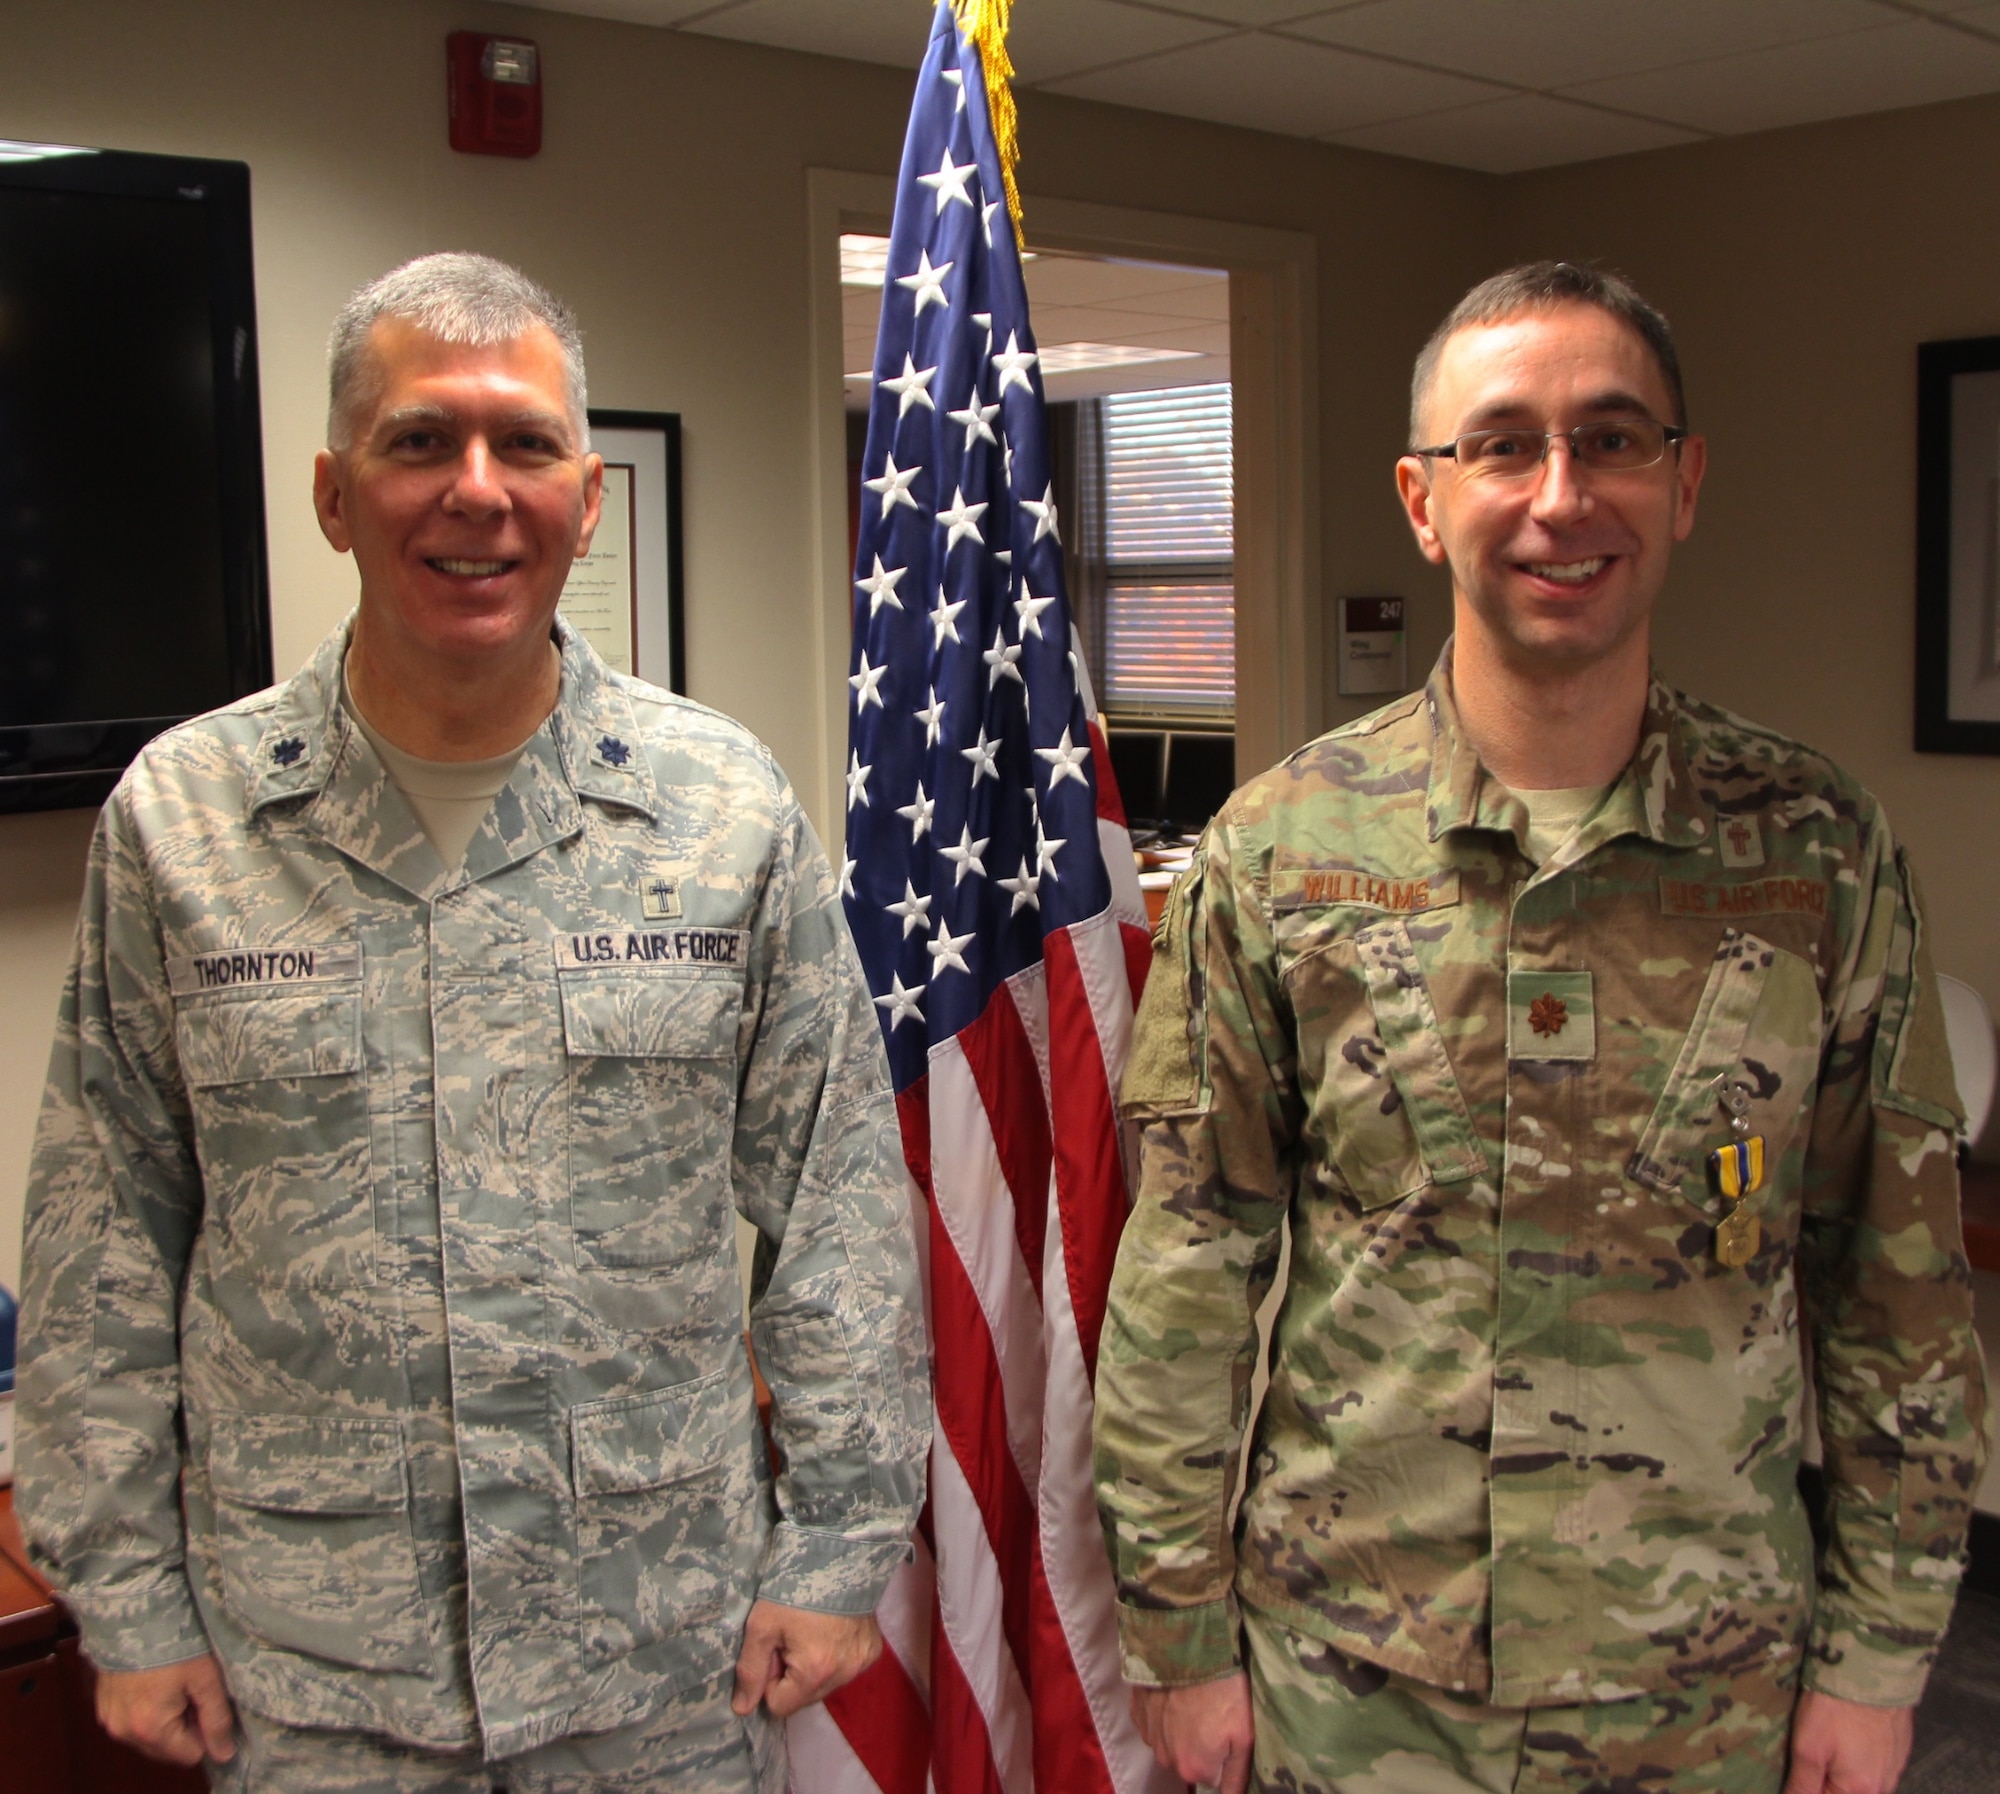 At left, Chaplain (Lt. Col.) Thornton shares a smile as he presents the Air Force Commendation Medal to Chaplain (Maj.) Michael Williams, for Meritorious Service in a special ceremony held Feb. 9, 2019, at Scott Air Force Base, Illinois.  The medal and certificate recognized Chaplain Williams work over a long multi-year period starting in September 2012.  The 932nd AW Chapel Corps of chaplains and chaplain assistants, referred to as Religious Support Teams (RST), have the privilege of focusing on caring for unit members and their families throughout the deployment cycle and beyond. Unit visits and personal engagements are a part of this warrior care. "The 932nd AW team provide proactive pastoral care as well as religious accommodations that meet diverse spiritual needs, in order to foster the spiritual pillar of Comprehensive Airman Fitness within the Wing," said Chaplain Thornton, who also retires today.